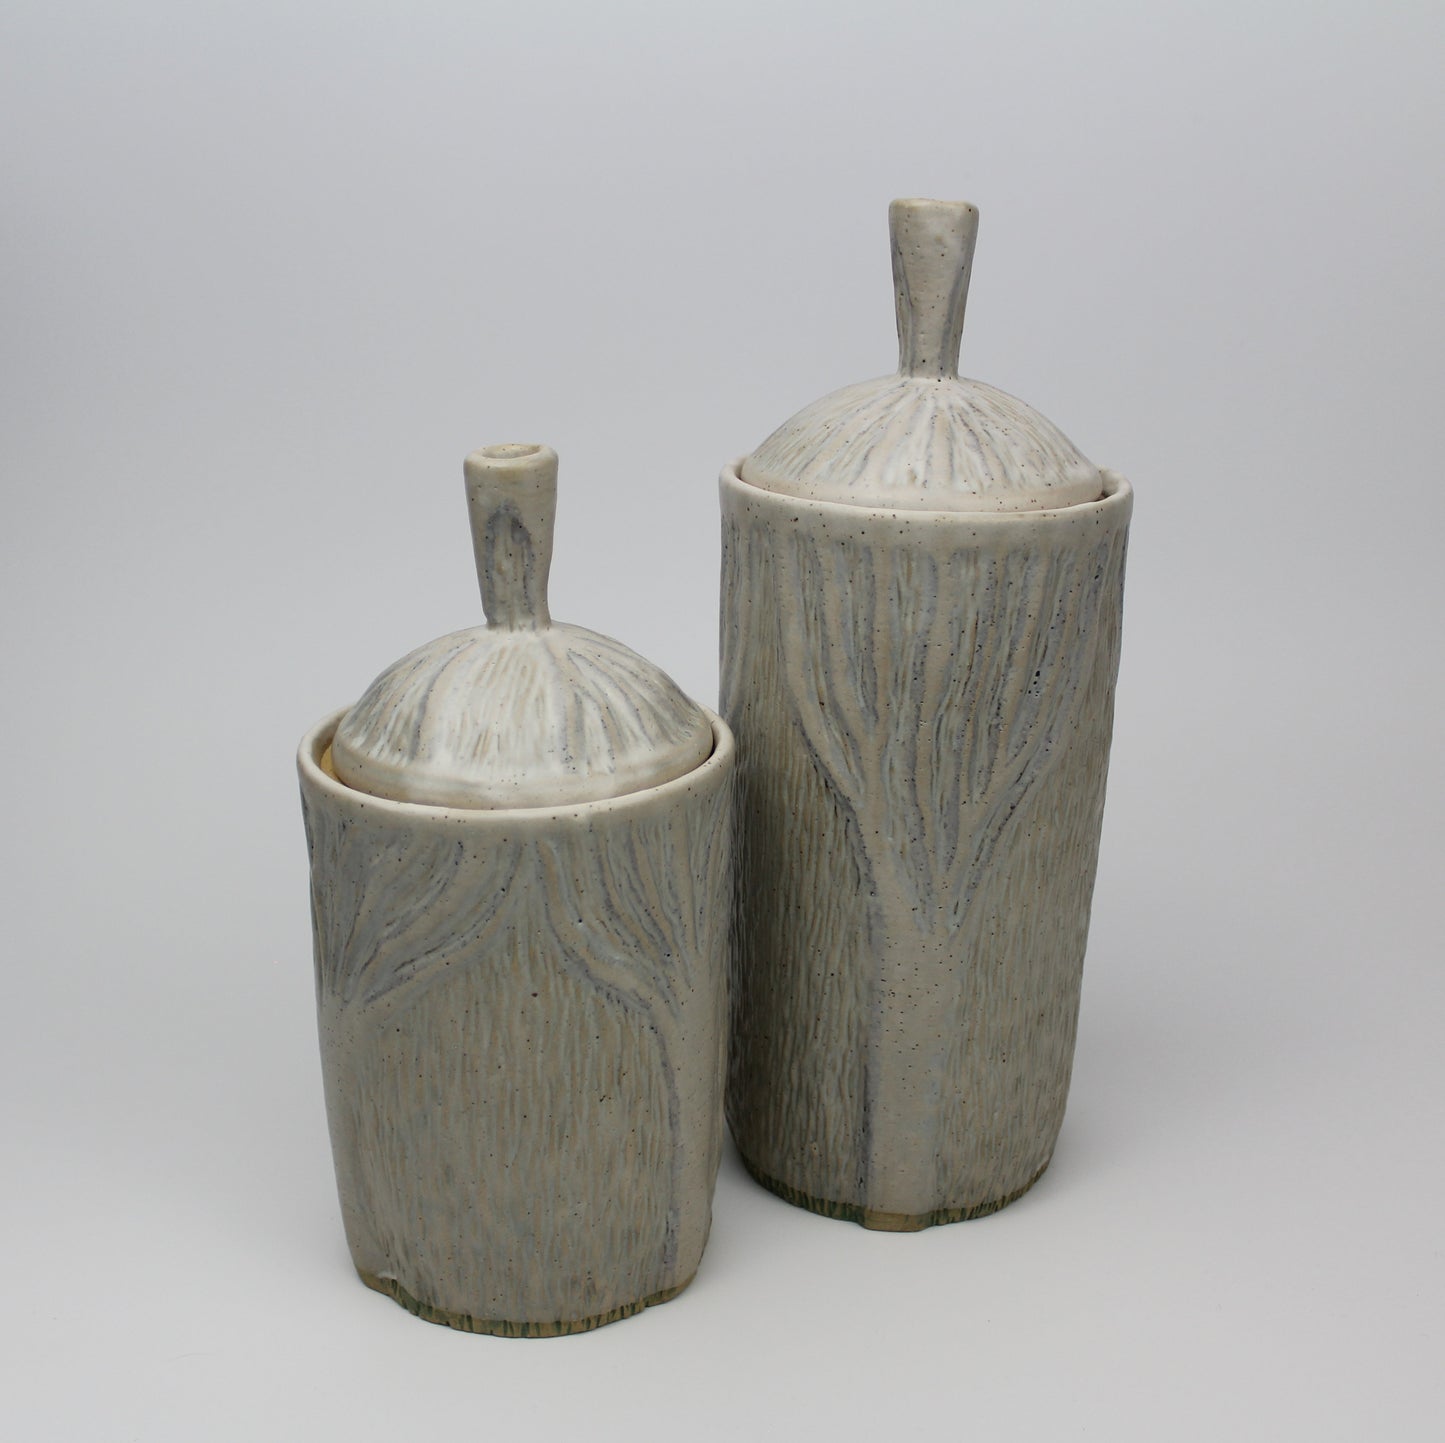 Peter Glarborg - Carved Tree Canisters